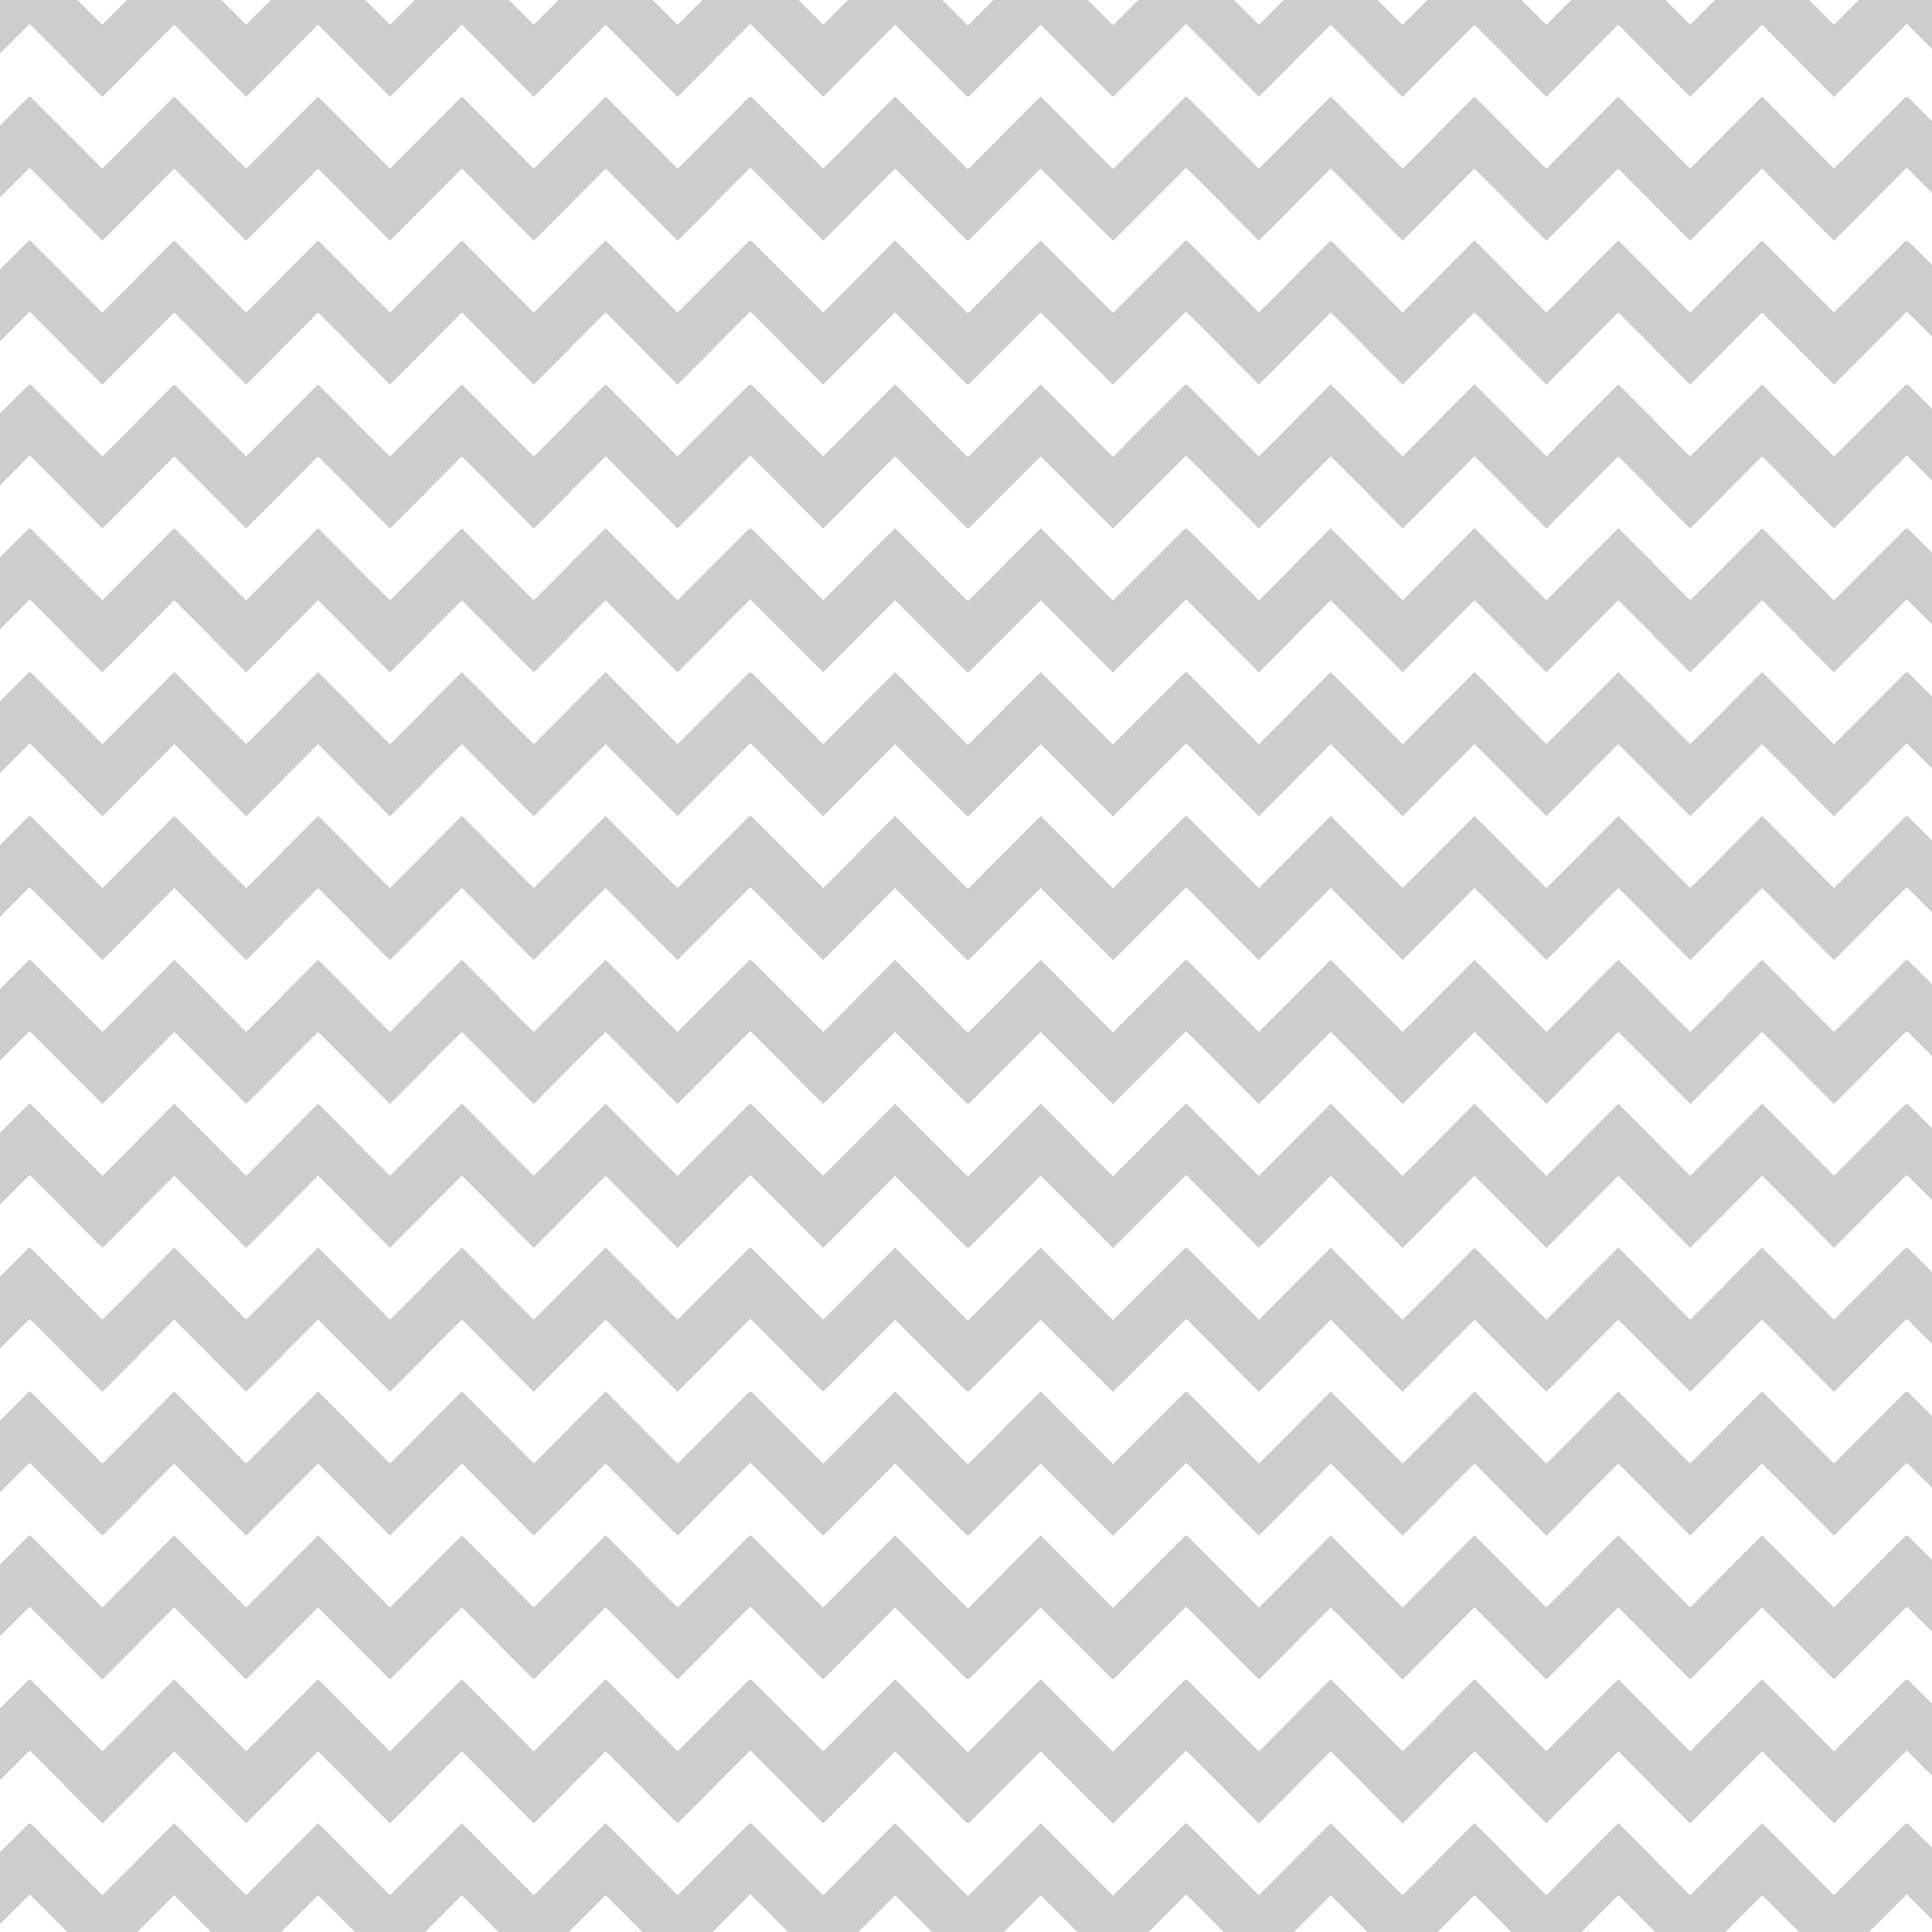 8-best-images-of-printable-chevron-pattern-borders-grey-and-white